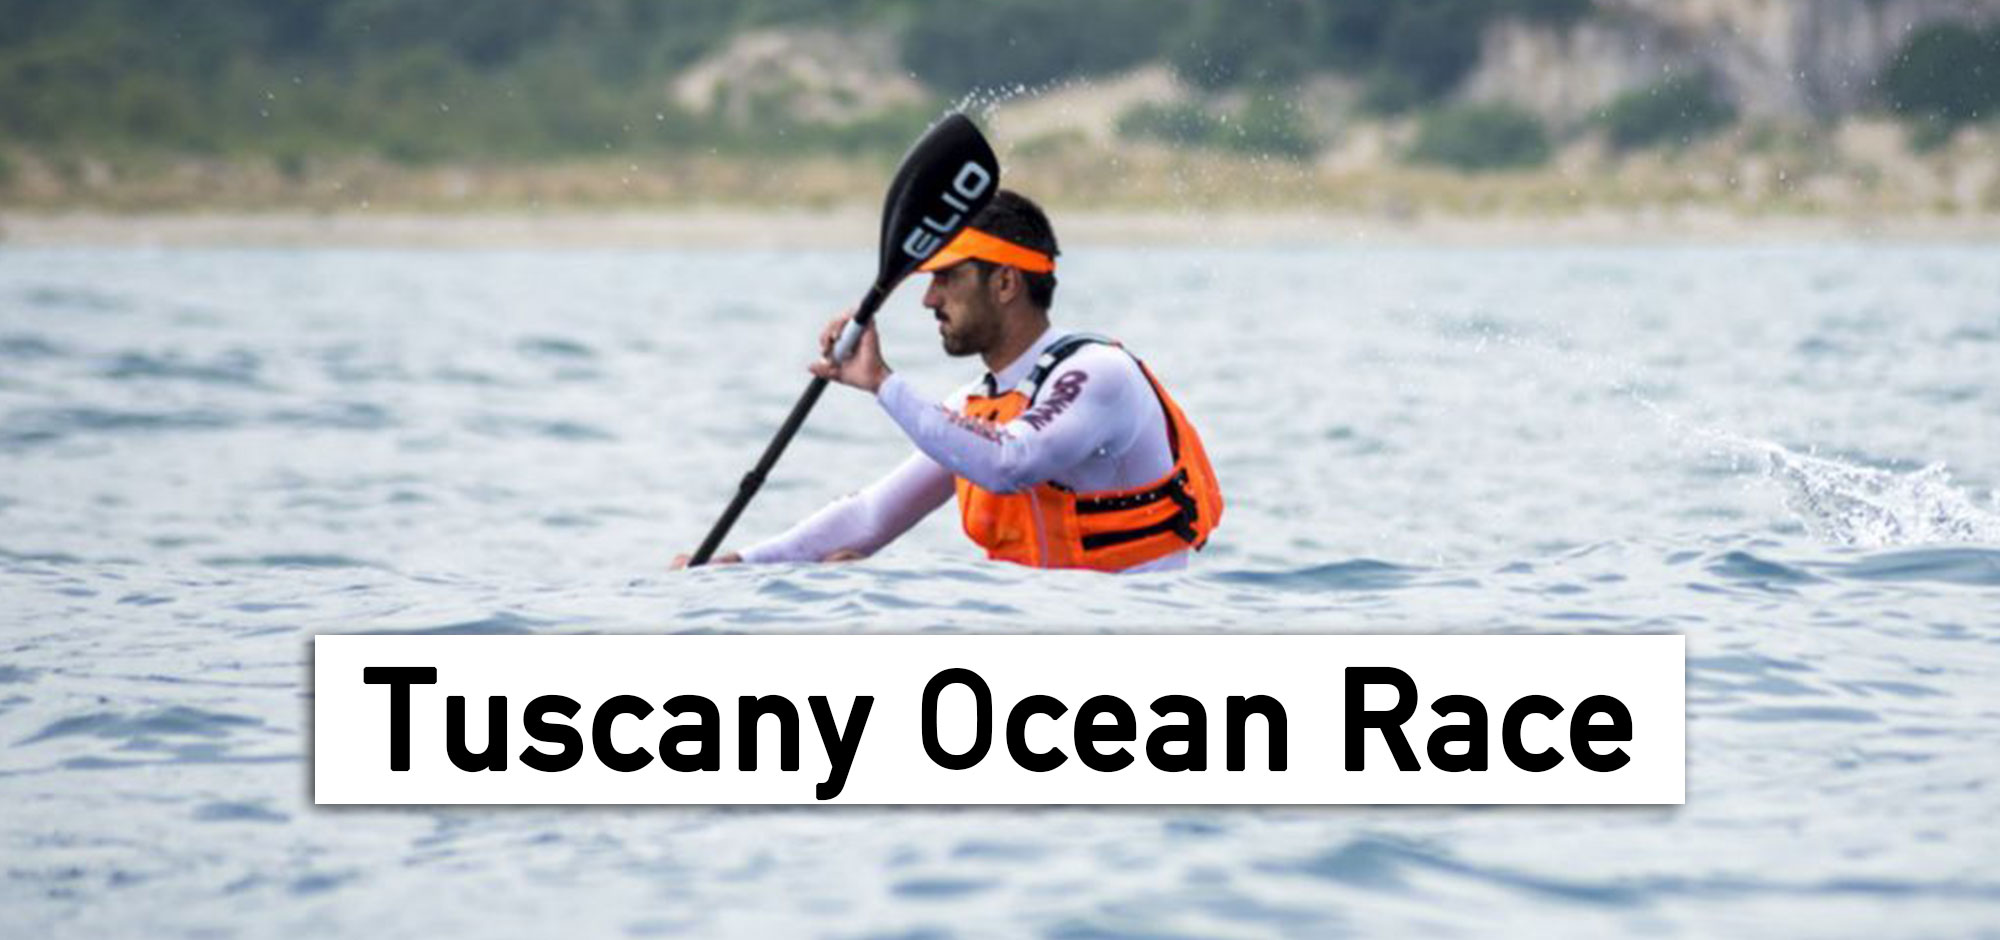 Tuscany-Ocean-Race-Surfski-Outrigger-Downwind-Event